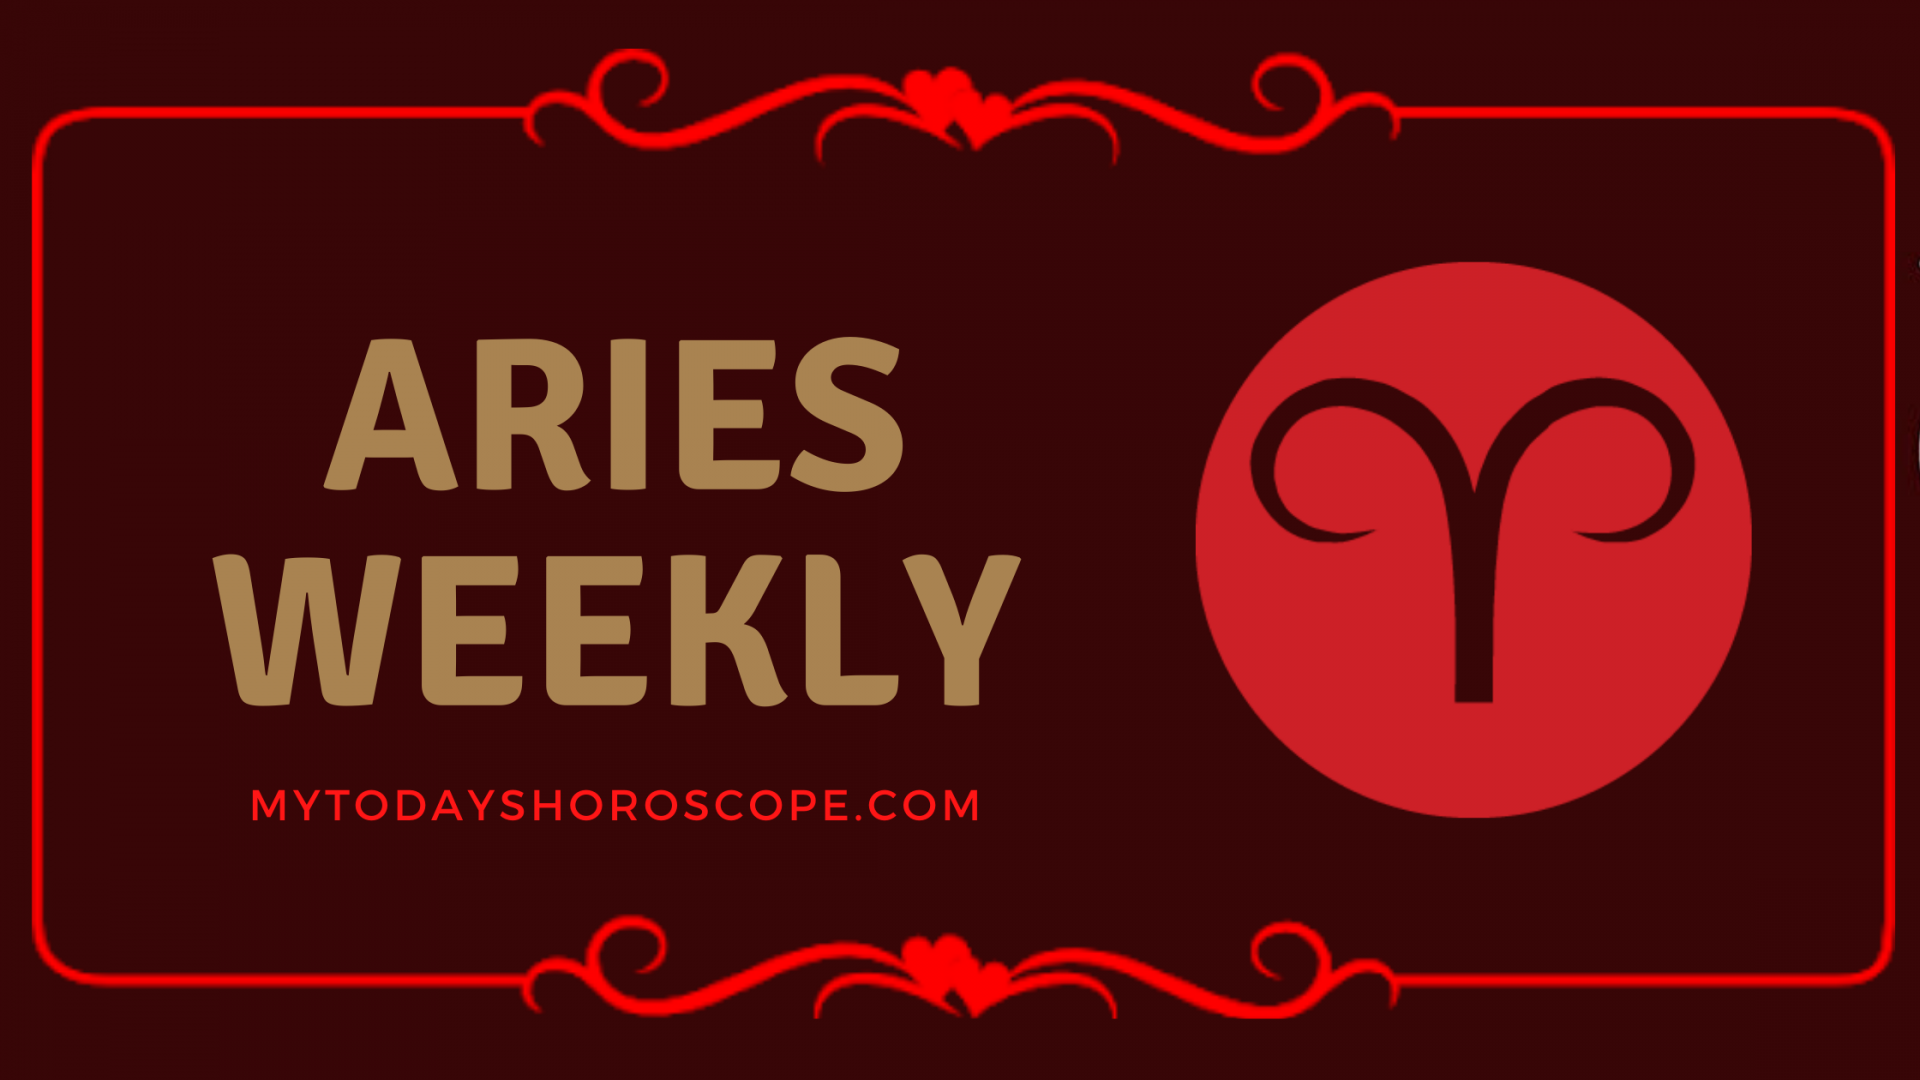 Aries Weekly Horoscope (April 19 - 25): Predictions for Love, Financial, Career and Health